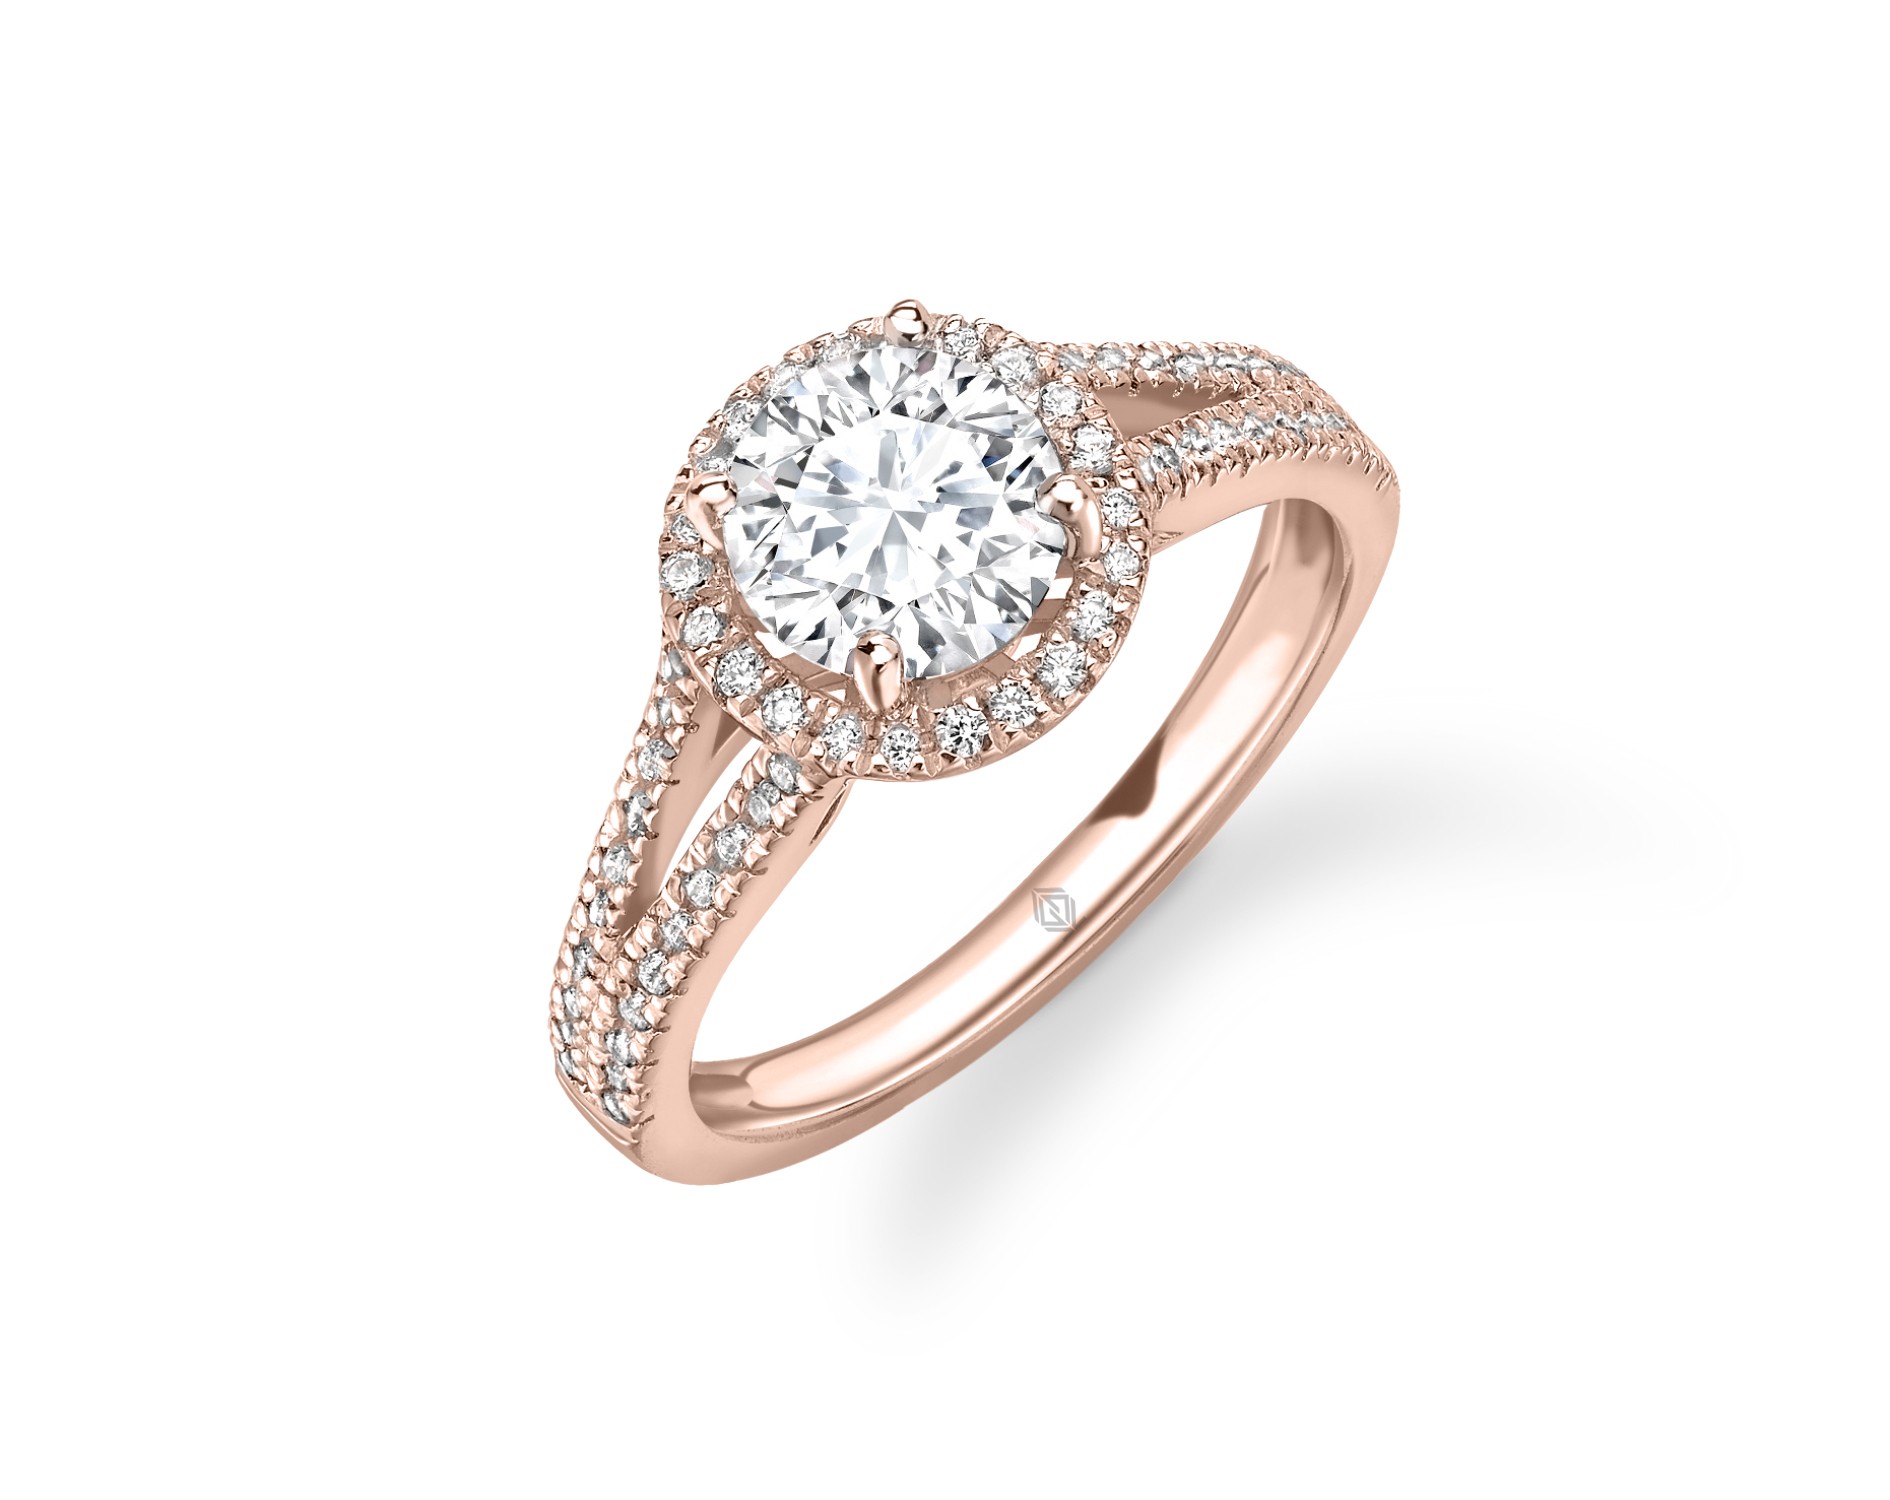 18K ROSE GOLD HALO DIAMOND ENGAGEMENT RING WITH SPLIT SHANKS IN PAVE SET